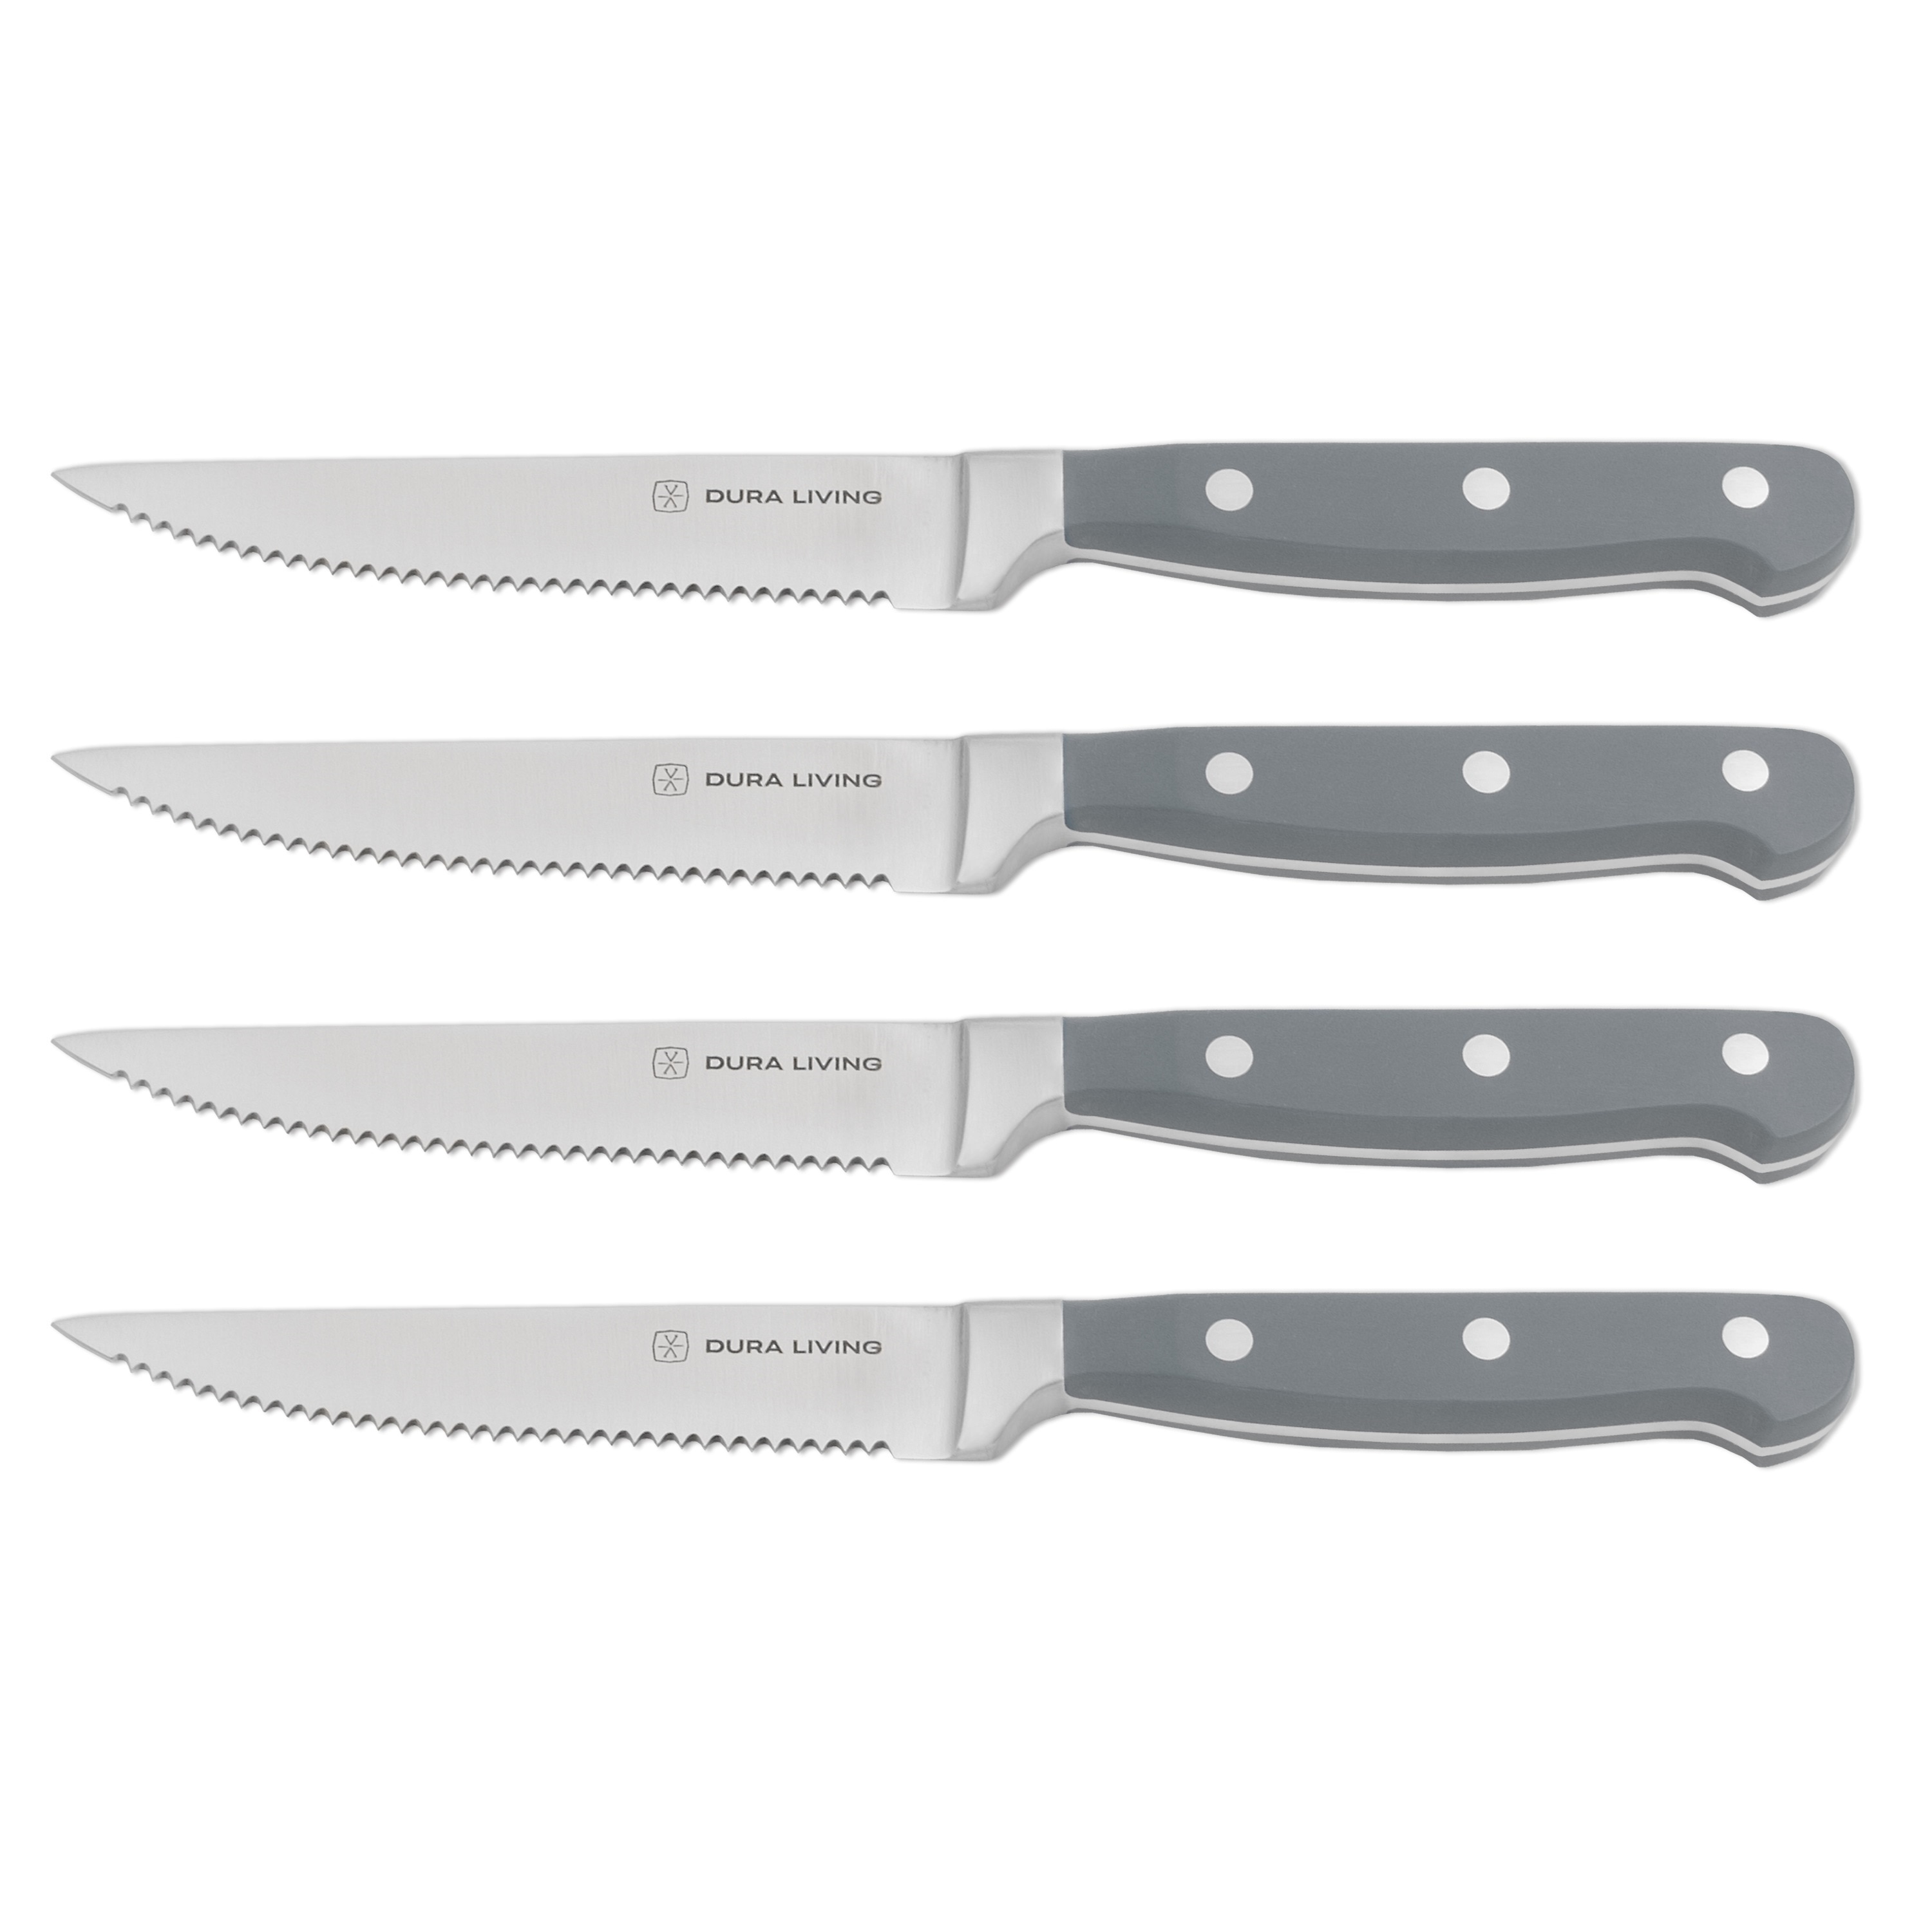 https://ak1.ostkcdn.com/images/products/is/images/direct/0ee5ec90f780932bc67f20d8d3f846bb205355fe/Dura-Living-Steak-Knives-Set-of-4---Superior-Forged-High-Carbon-Stainless-Steel-Serrated-Classic-4.5-inch-Steak-Knife-set%2C-Gray.jpg